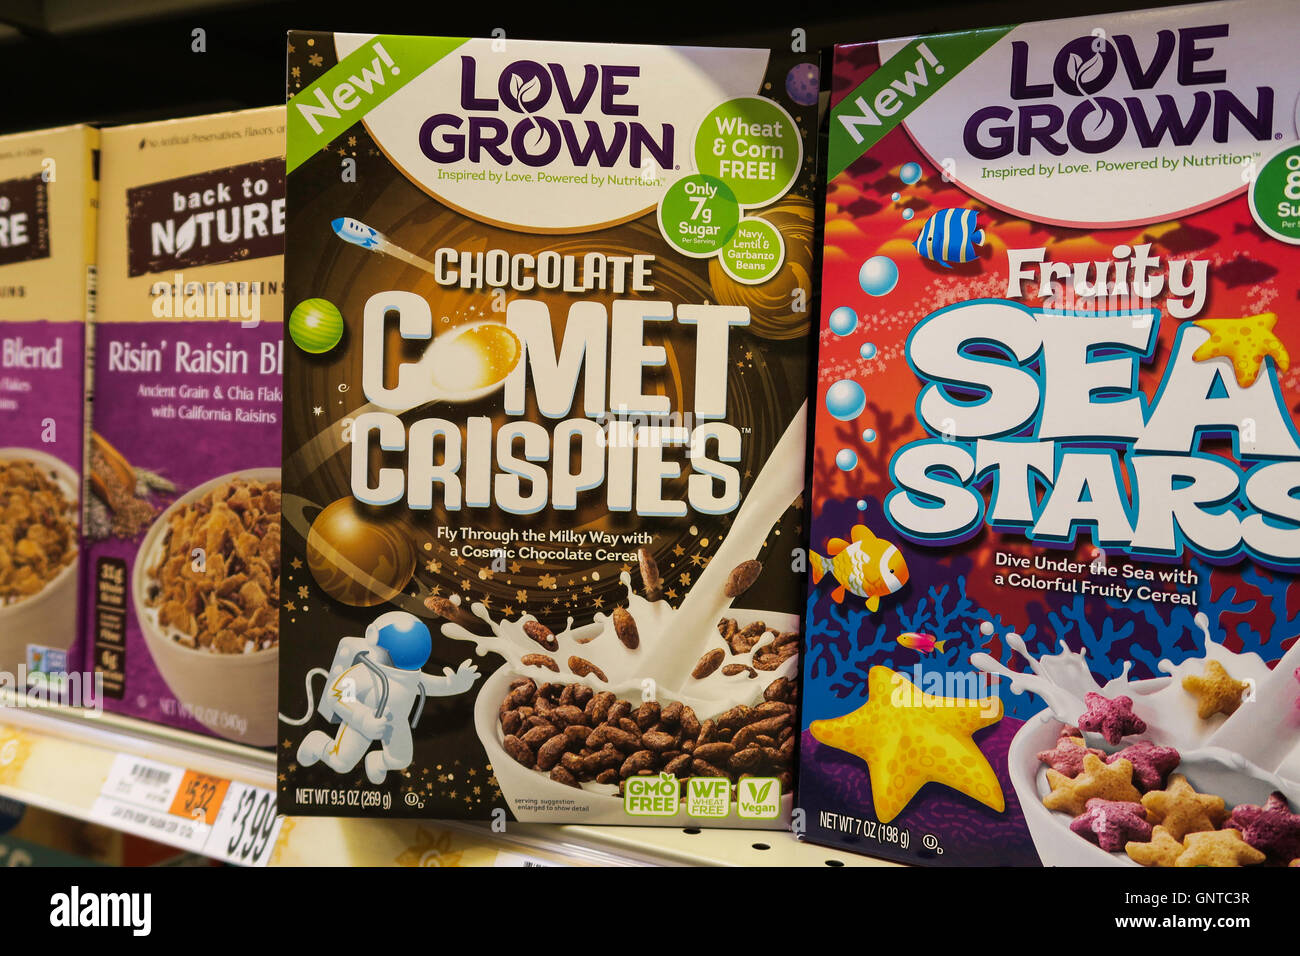 'Love Grown' Cereal at Wegmans Grocery Store, Westwood, Massachusetts, USA Stock Photo